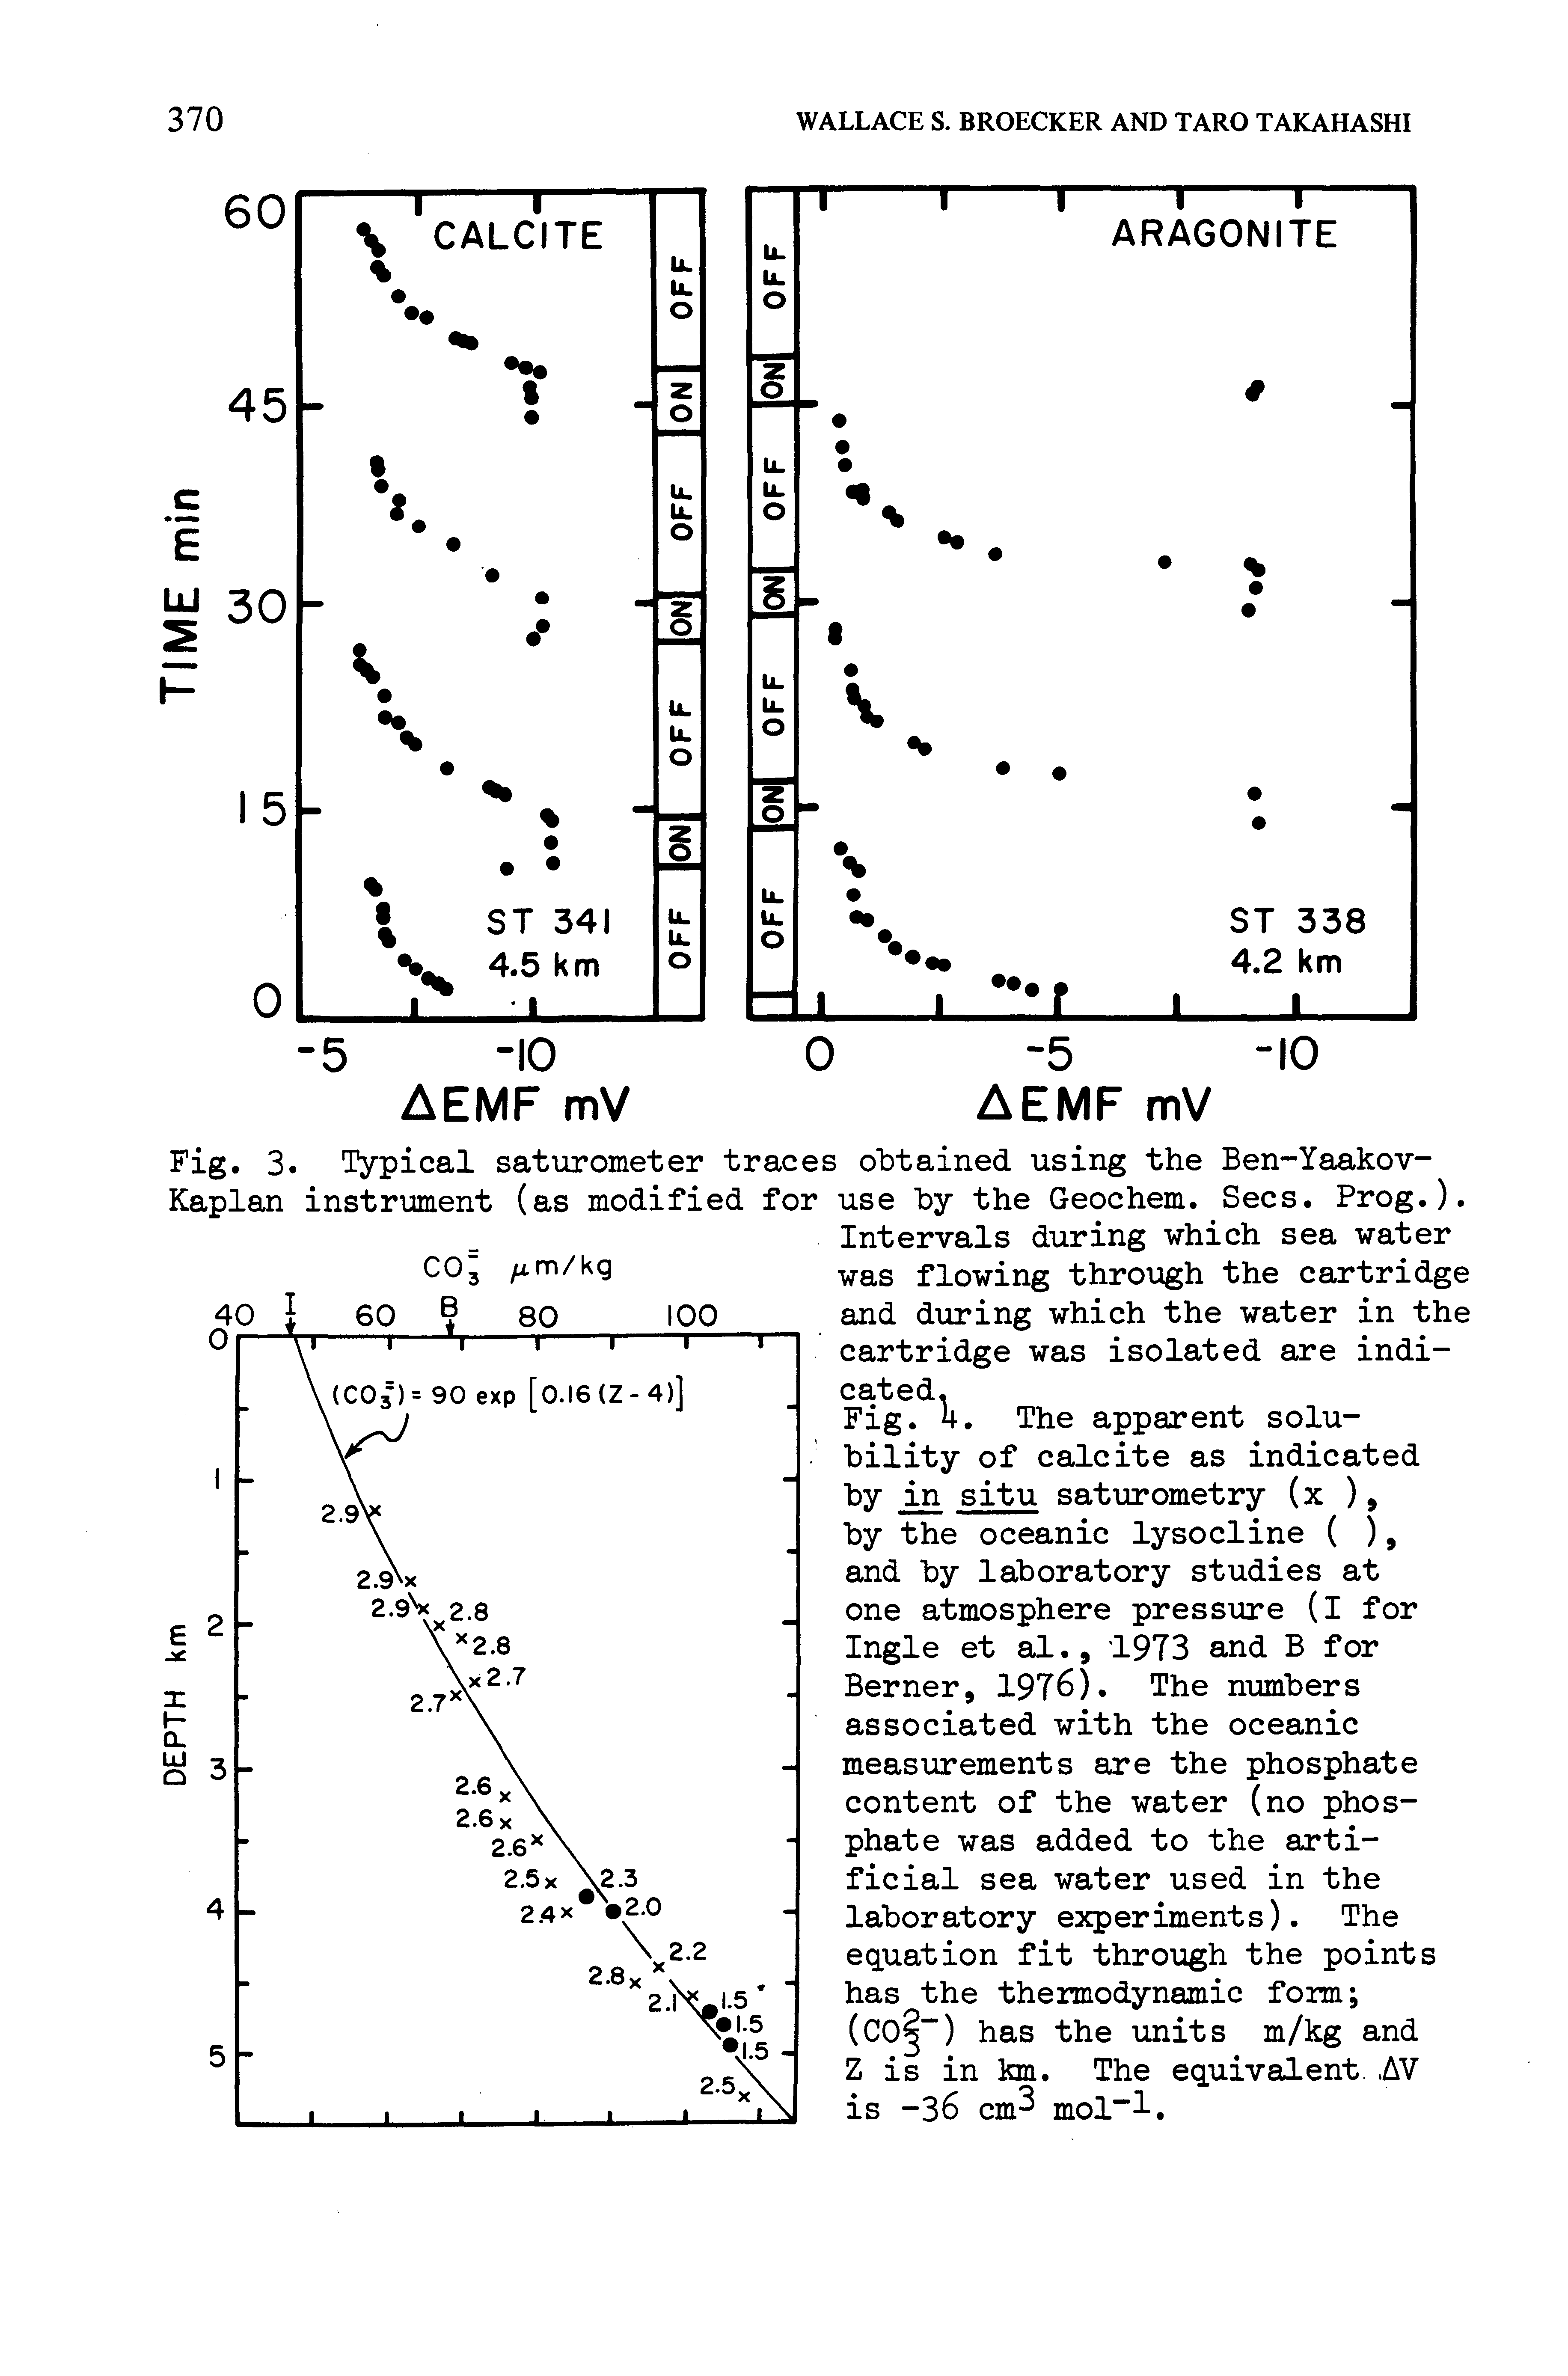 Fig. 4. The apparent solubility of calcite as indicated by in situ saturometry (x ), by the oceanic lysocline ( ), and by laboratory studies at one atmosphere pressure (l for Ingle et al., 1973 and B for Berner, 1976). The numbers associated with the oceanic measurements are the phosphate content of the water (no phosphate was added to the artificial sea water used in the laboratory experiments). The equation fit through the points has the thermodynamic form ...